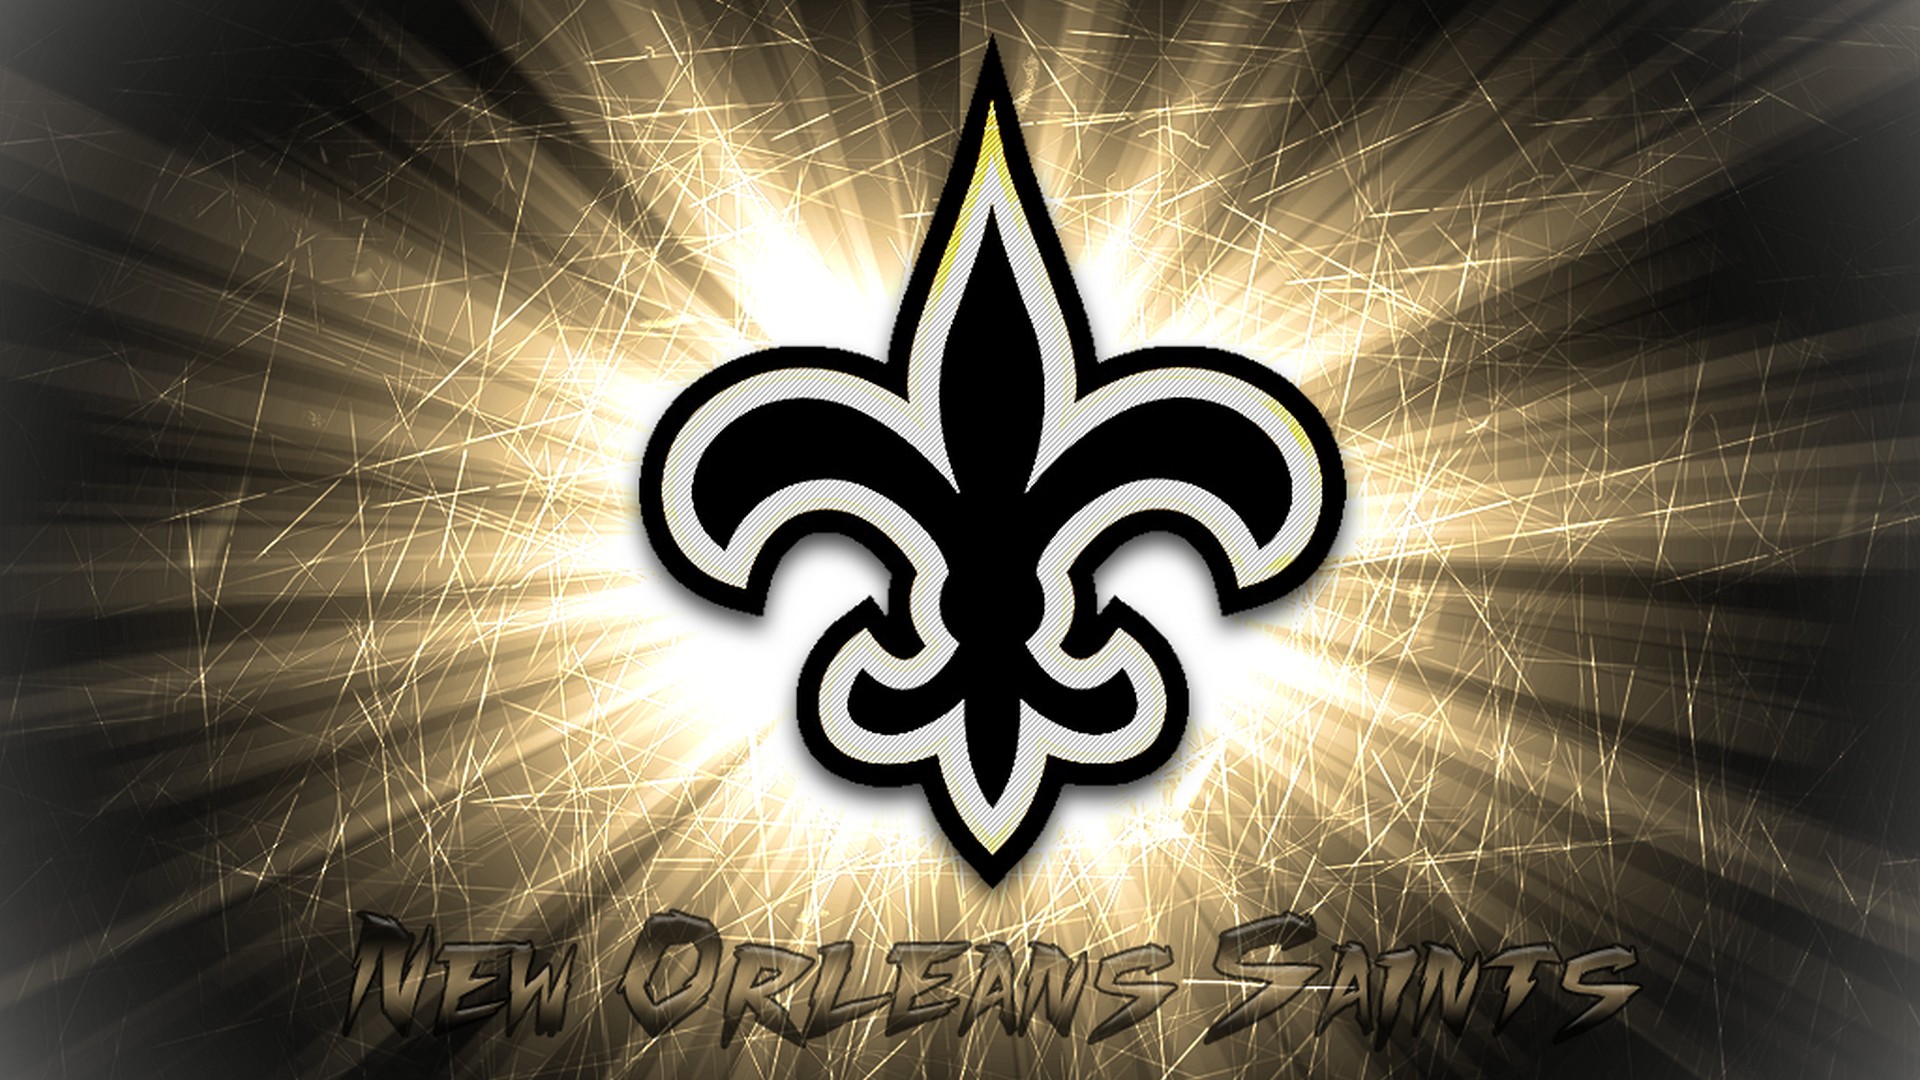 New Orleans Saints NFL HD Wallpapers with resolution 1920x1080 pixel. You can make this wallpaper for your Mac or Windows Desktop Background, iPhone, Android or Tablet and another Smartphone device